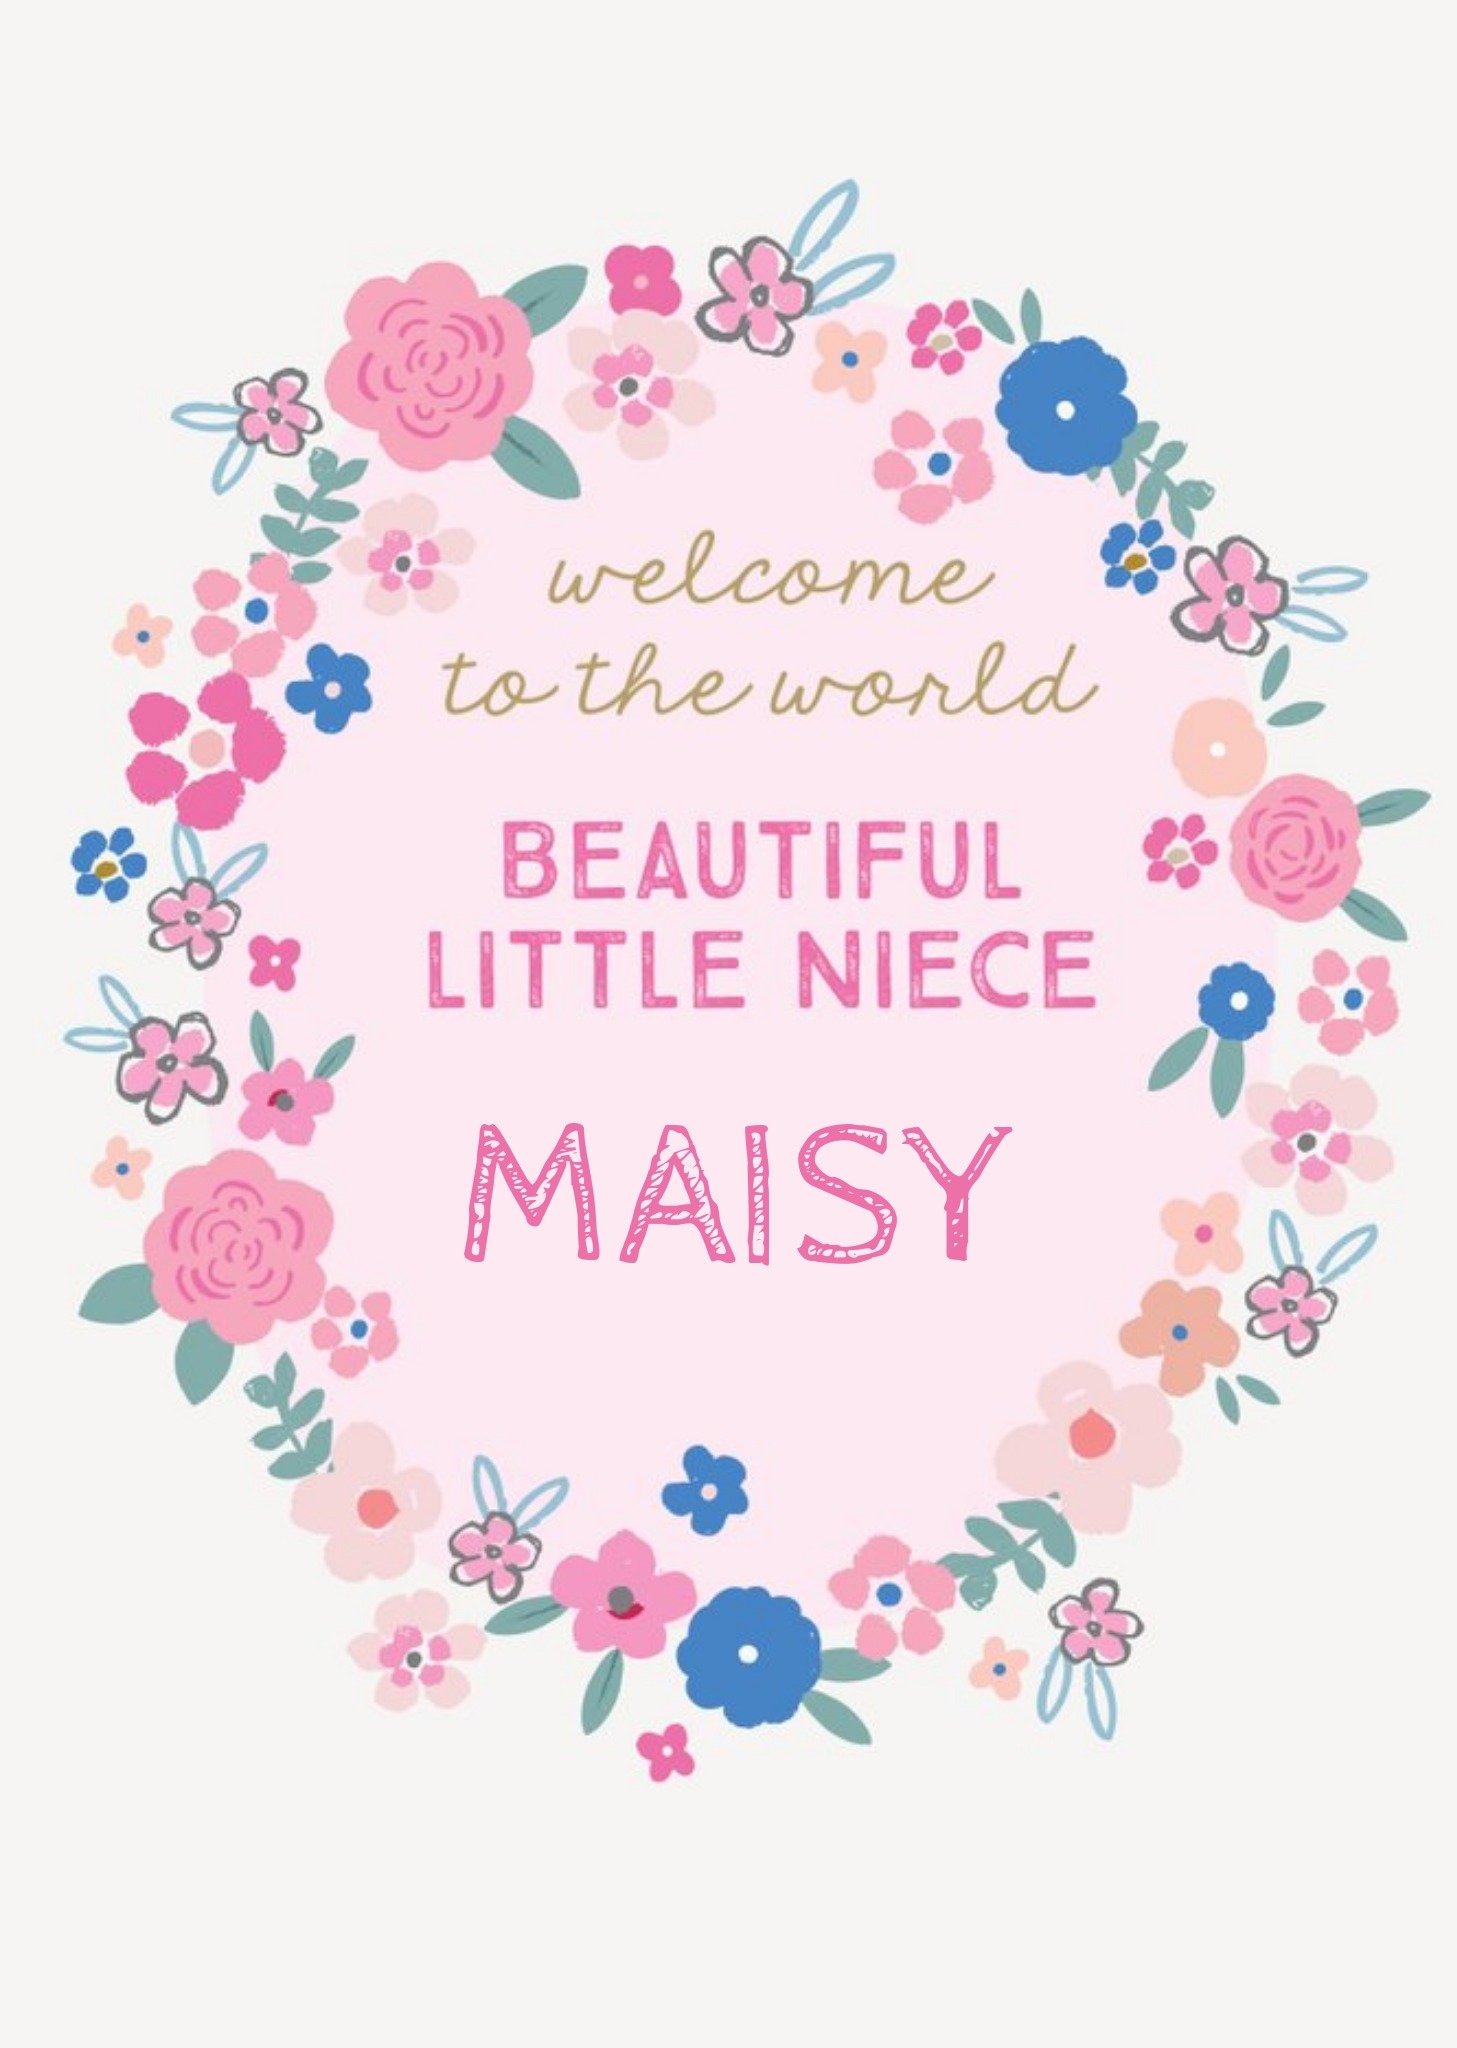 Moonpig Natalie Alex Designs Illustrated Pink Floral Welcome To The World Niece Card Ecard